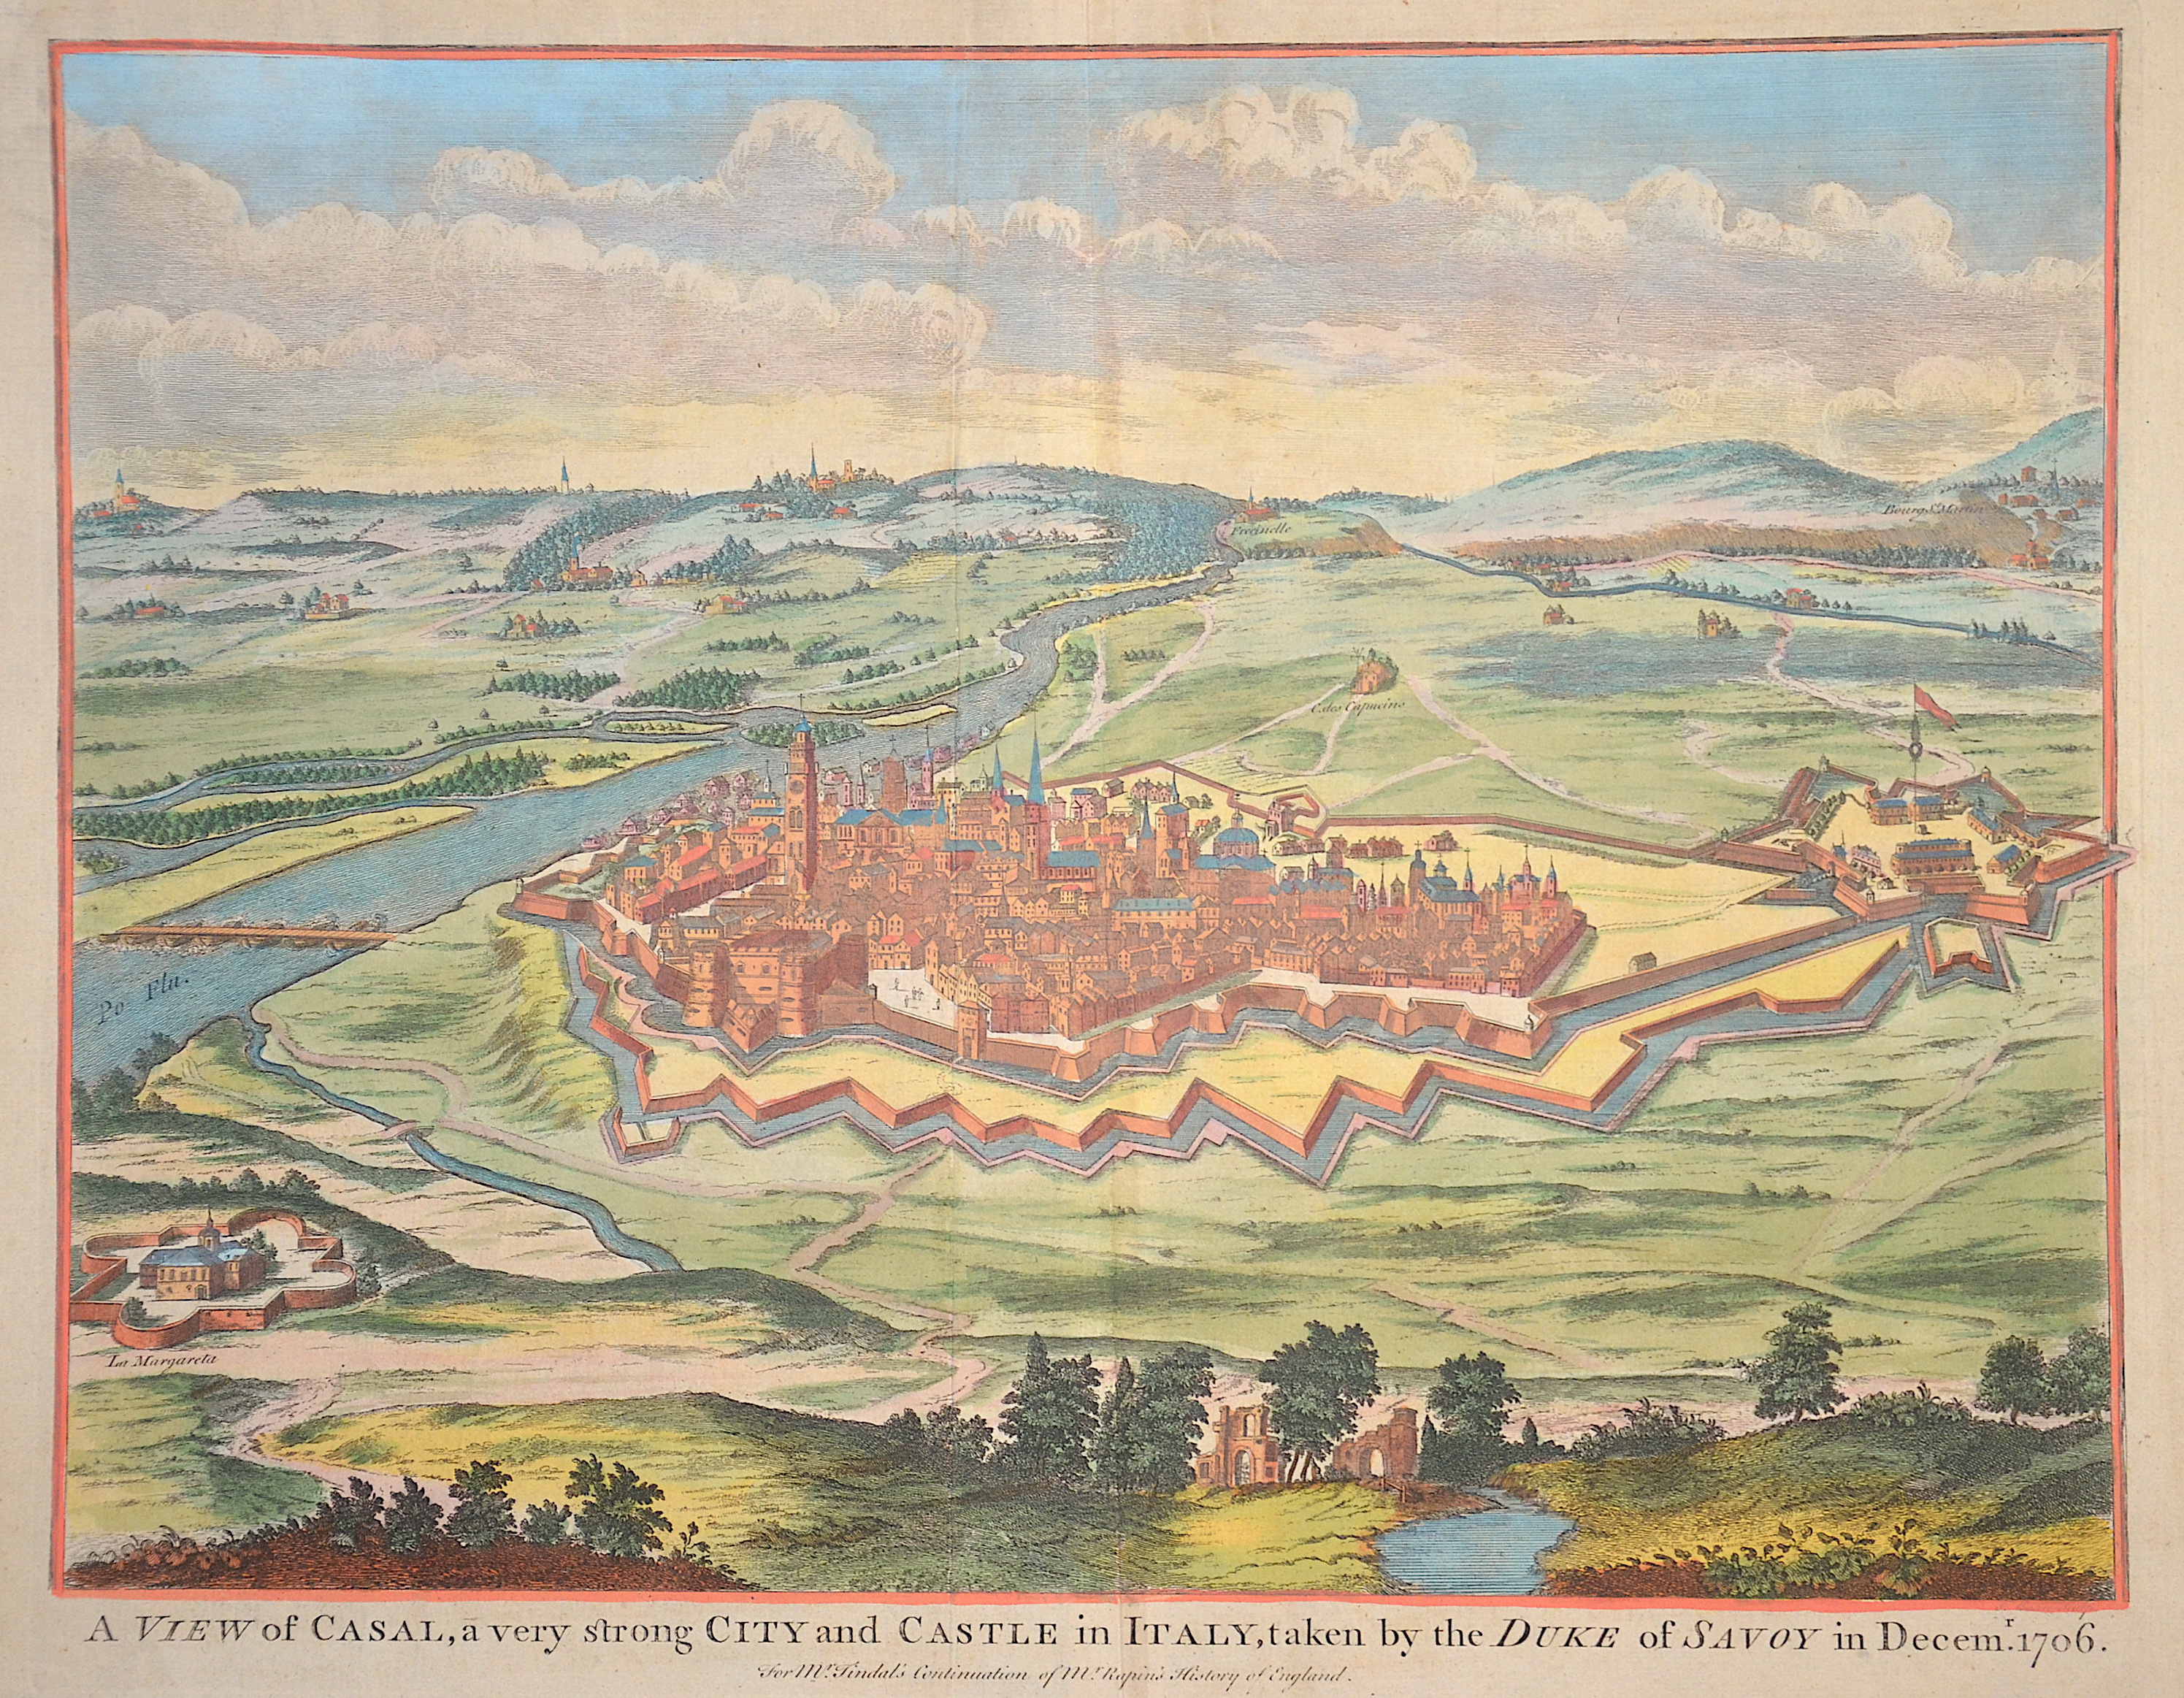 Rapin de Thoyras Paul A View of Casal, a very strong City and Castle in Italy, taken by the Duke of Savoy in Decemr. 1706.